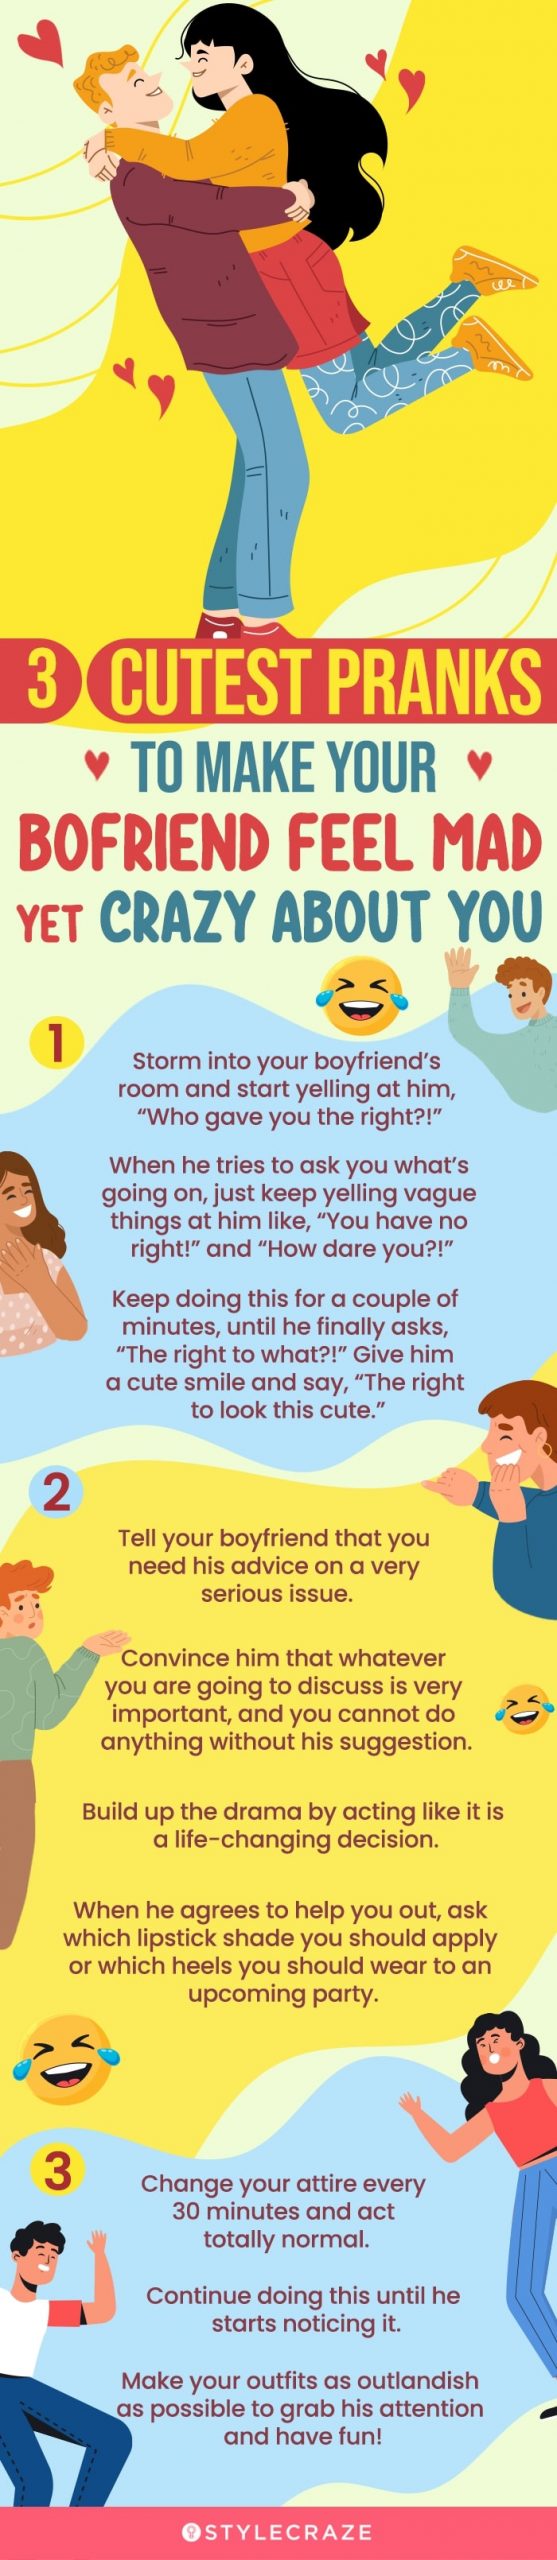 3 Cutest Pranks To Make Your Boyfriend Feel Mad Yet Crazy About You [infographic]